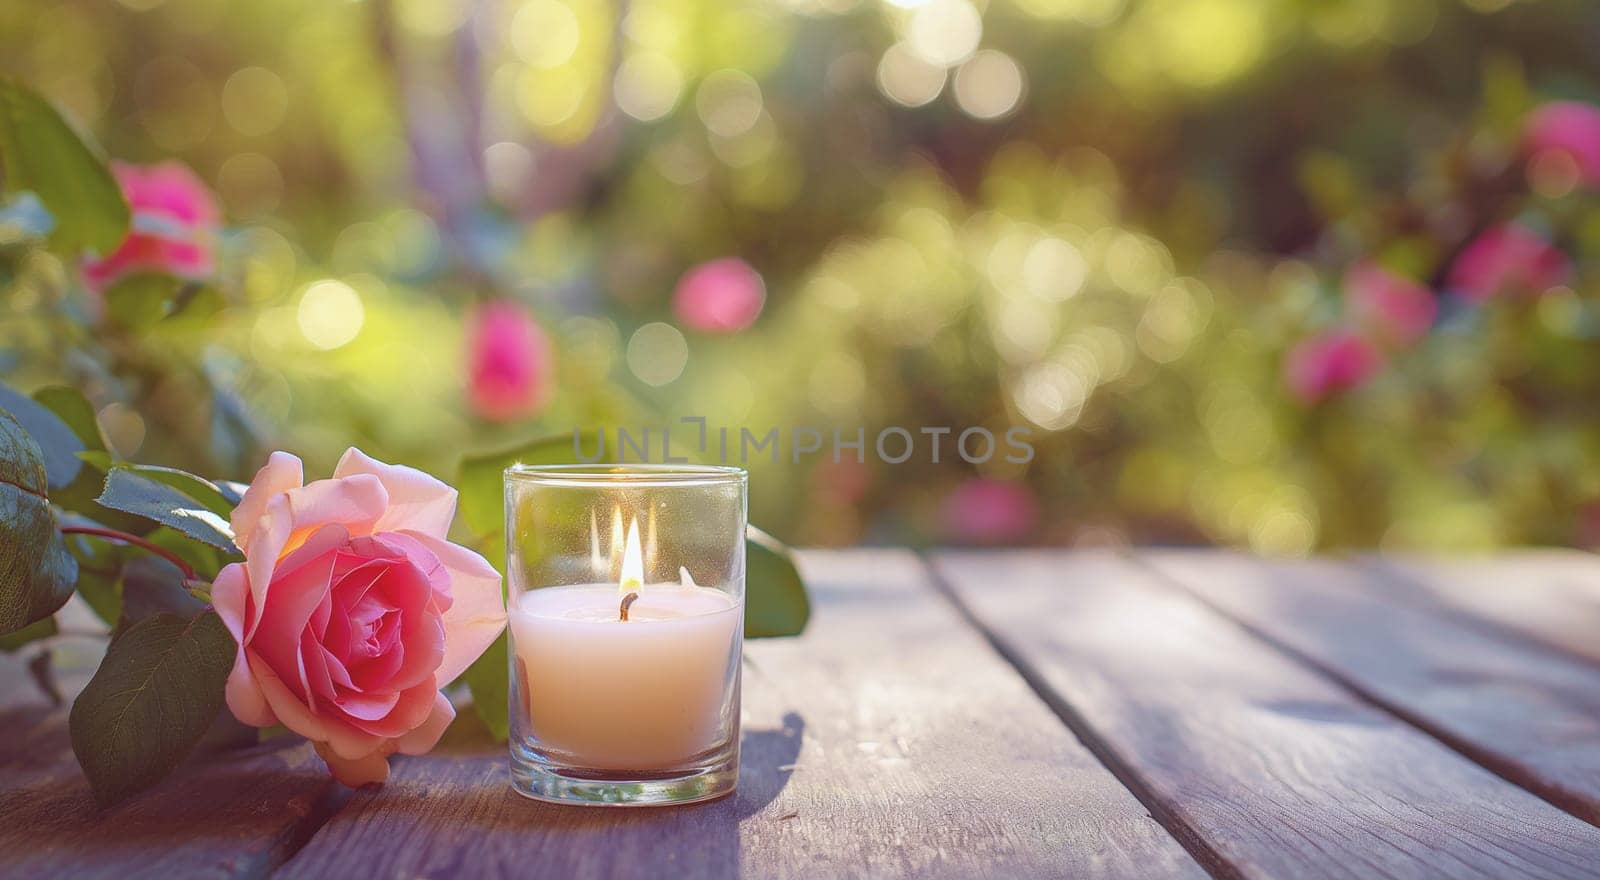 A candle and rose on a wooden table, with a lush garden backdrop. by kizuneko